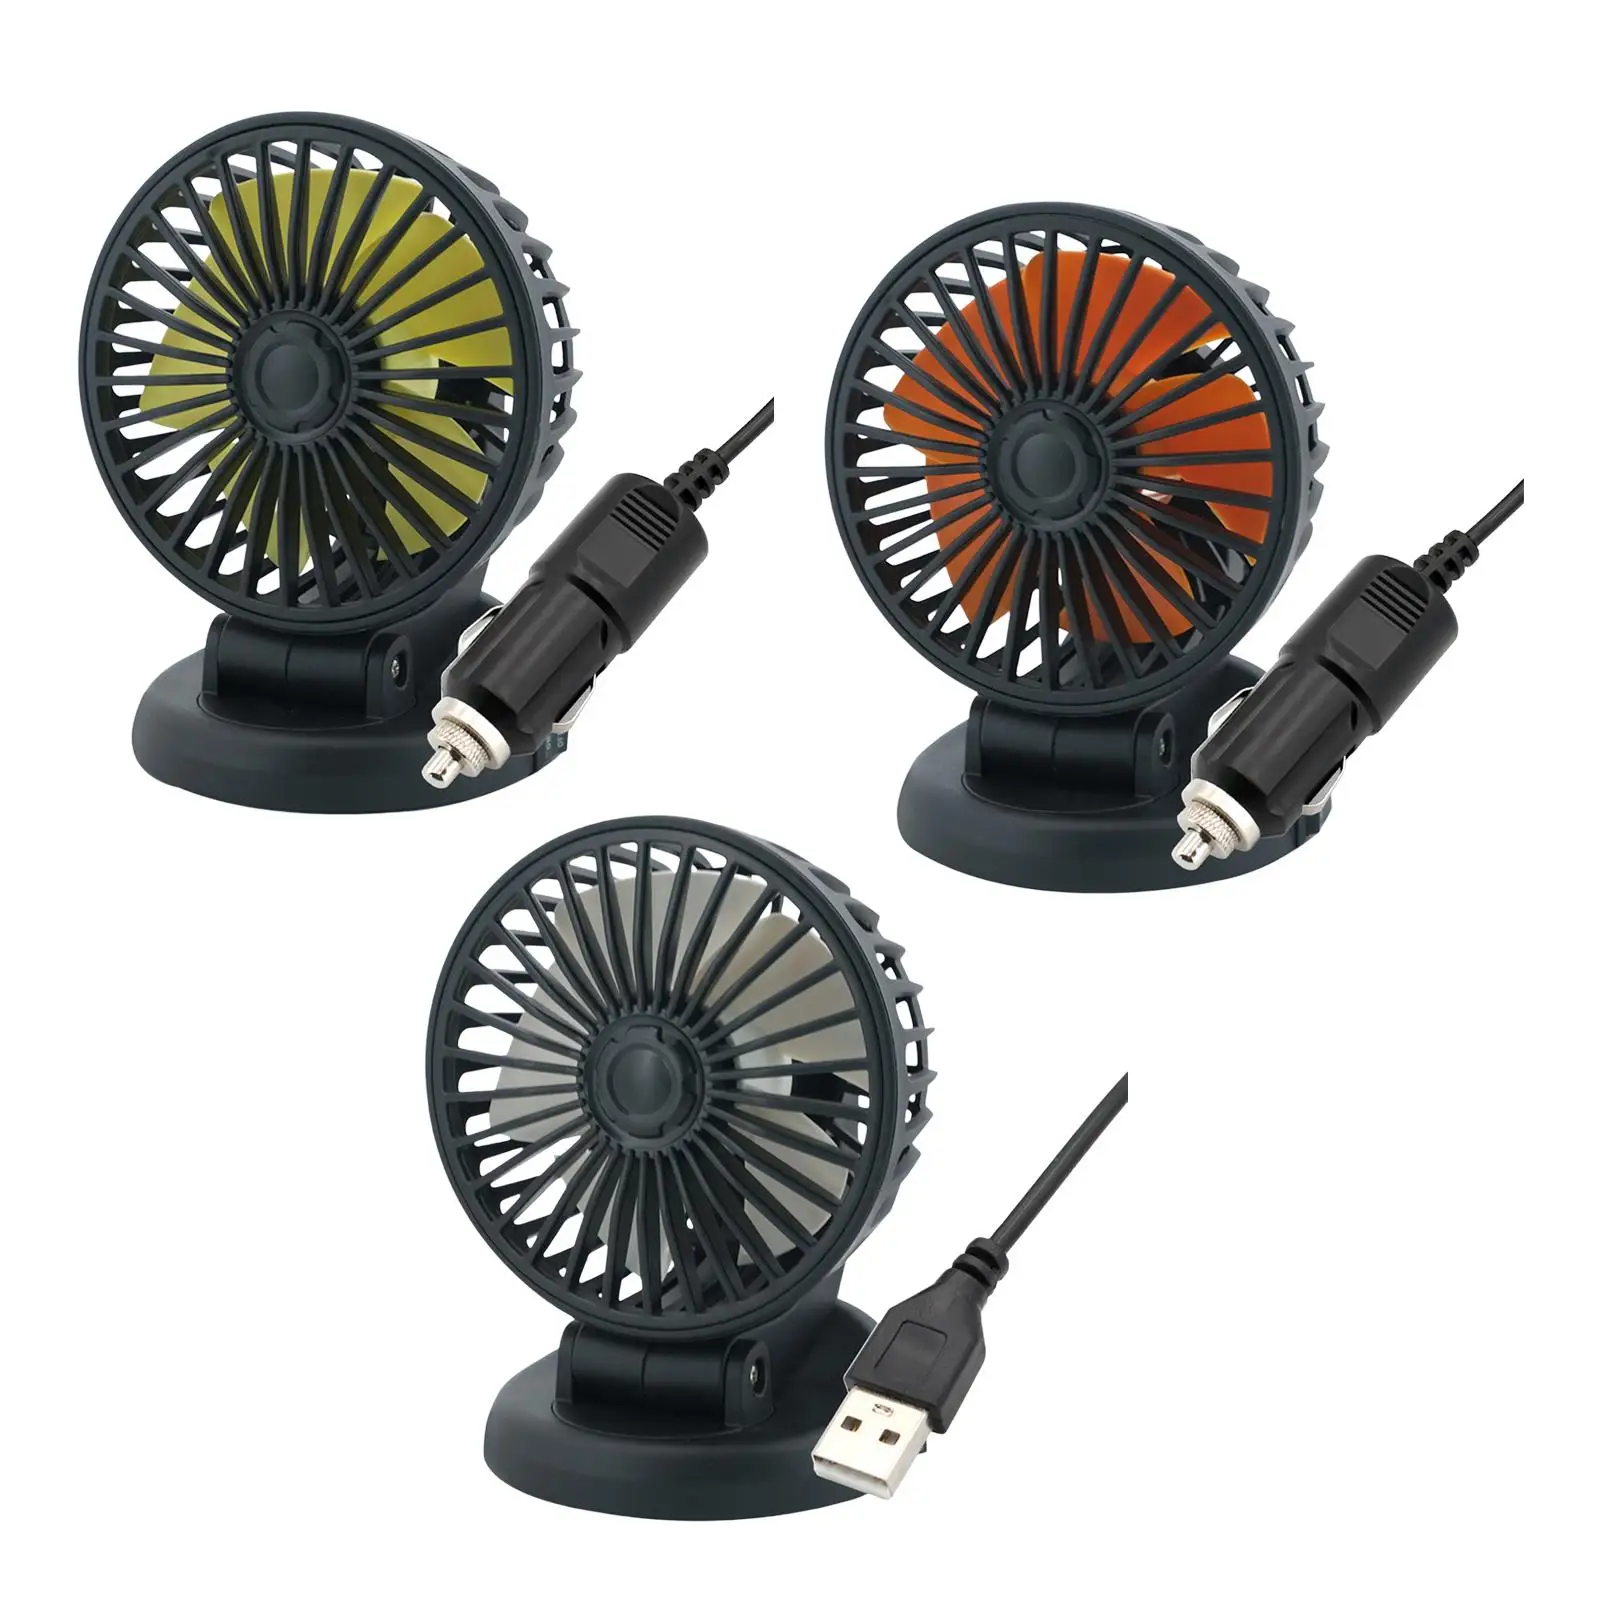 360 Degree Rotatable Electric Auto Seat Fan Auto Cooler Fan, Air Circulation Fan Portable Fan for Car for Vehicle Truck Van SUV